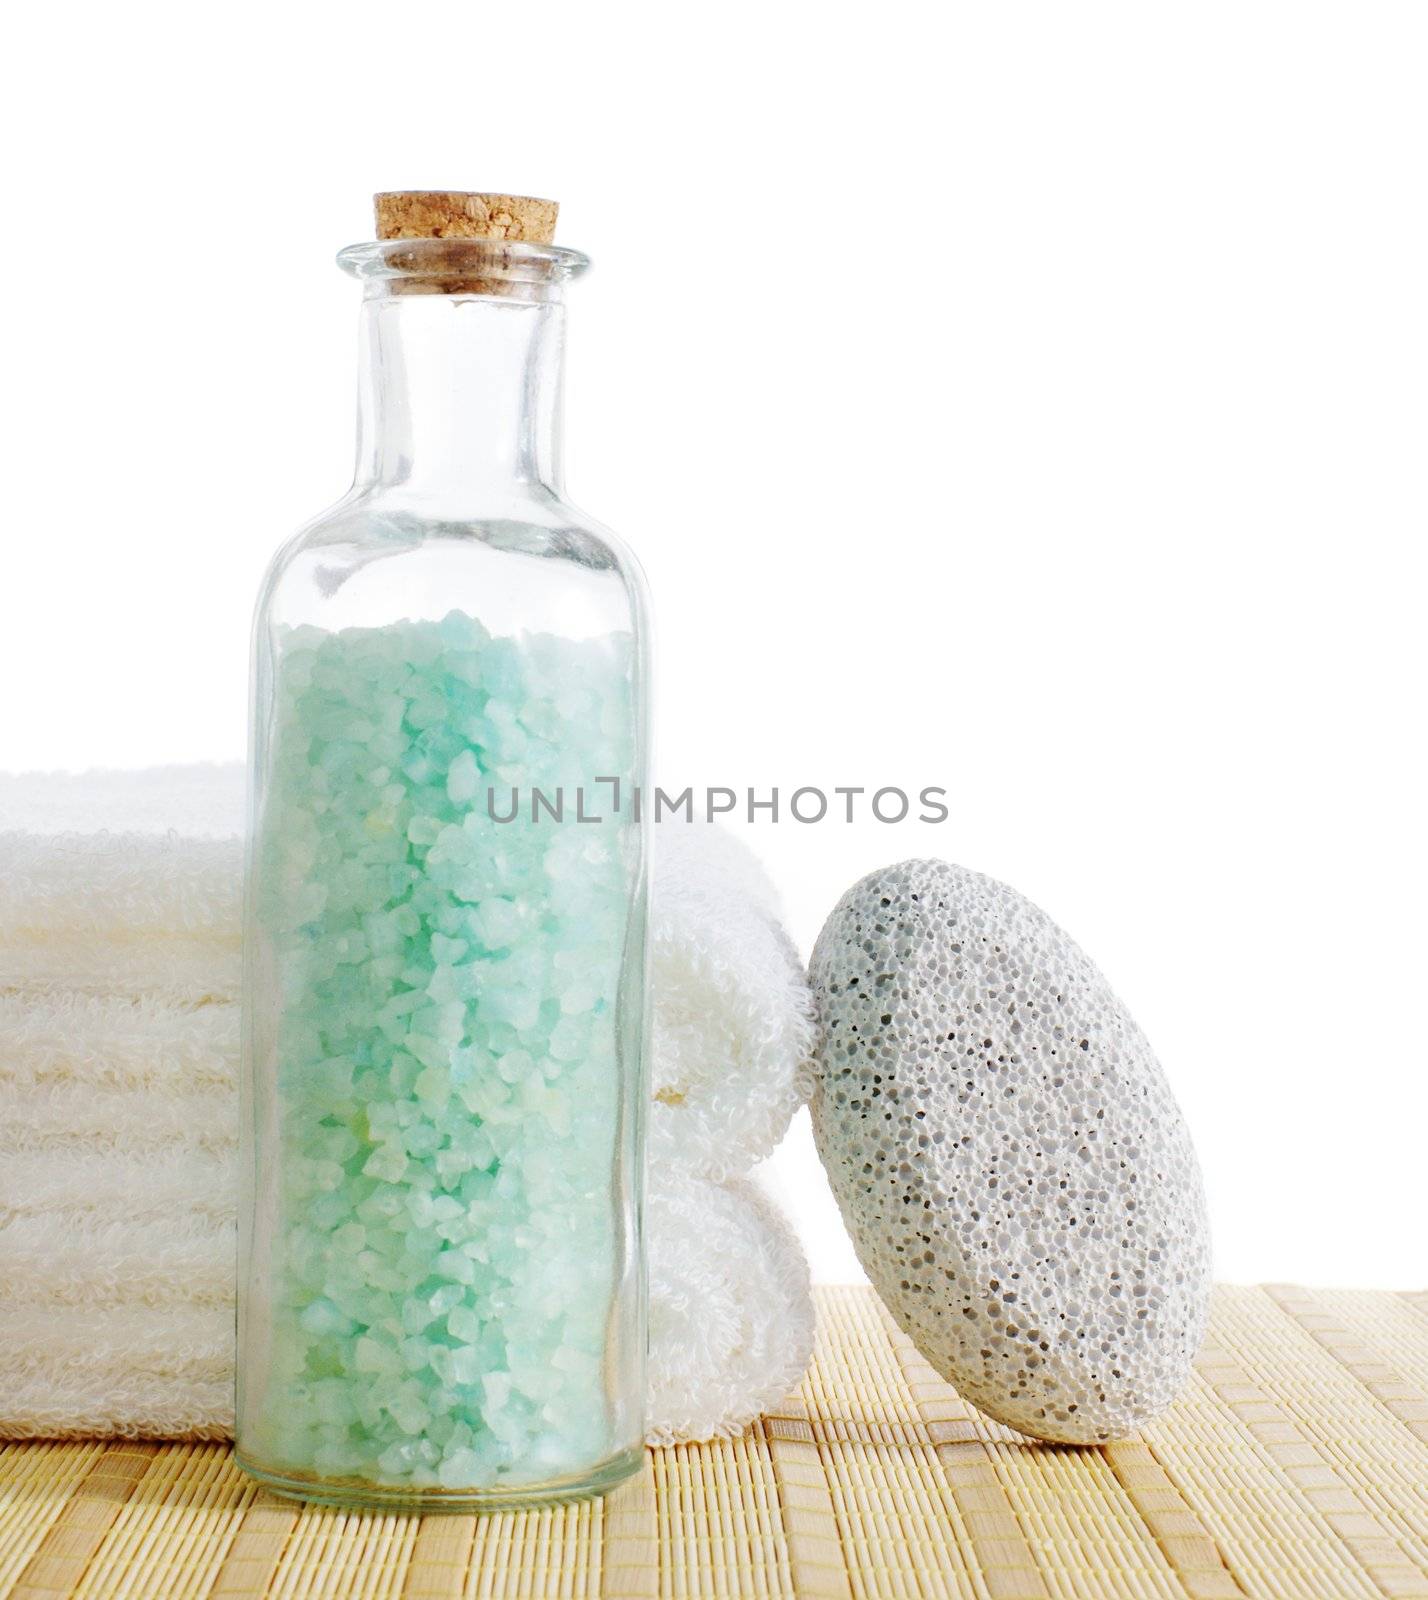 Bath salt, towels, and pumice stone against a white background.